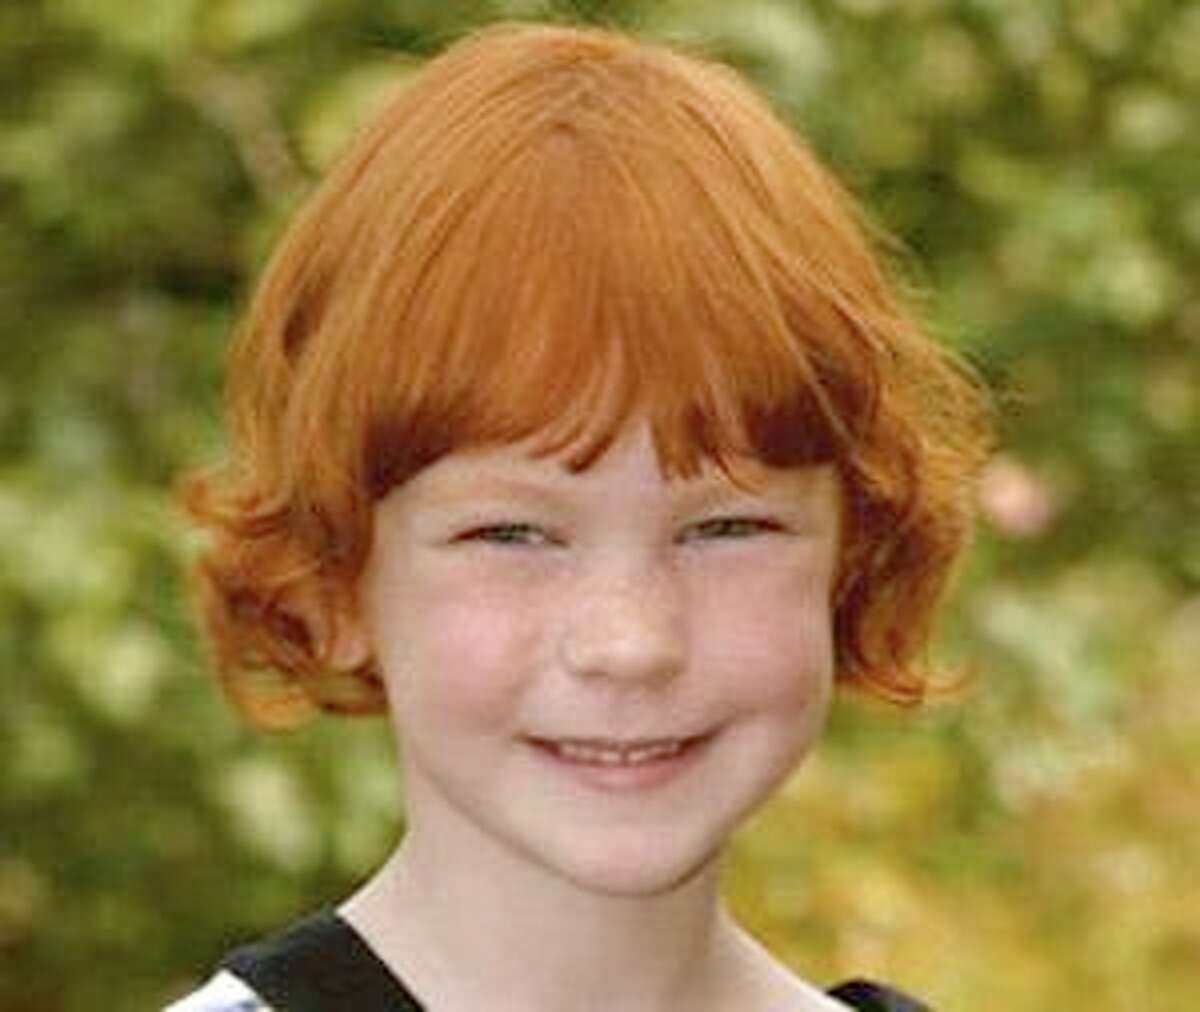 Catherine Hubbard died in the Sandy Hook Elementary School shooting in Newtown, Conn. on Friday, Dec. 14, 2012.